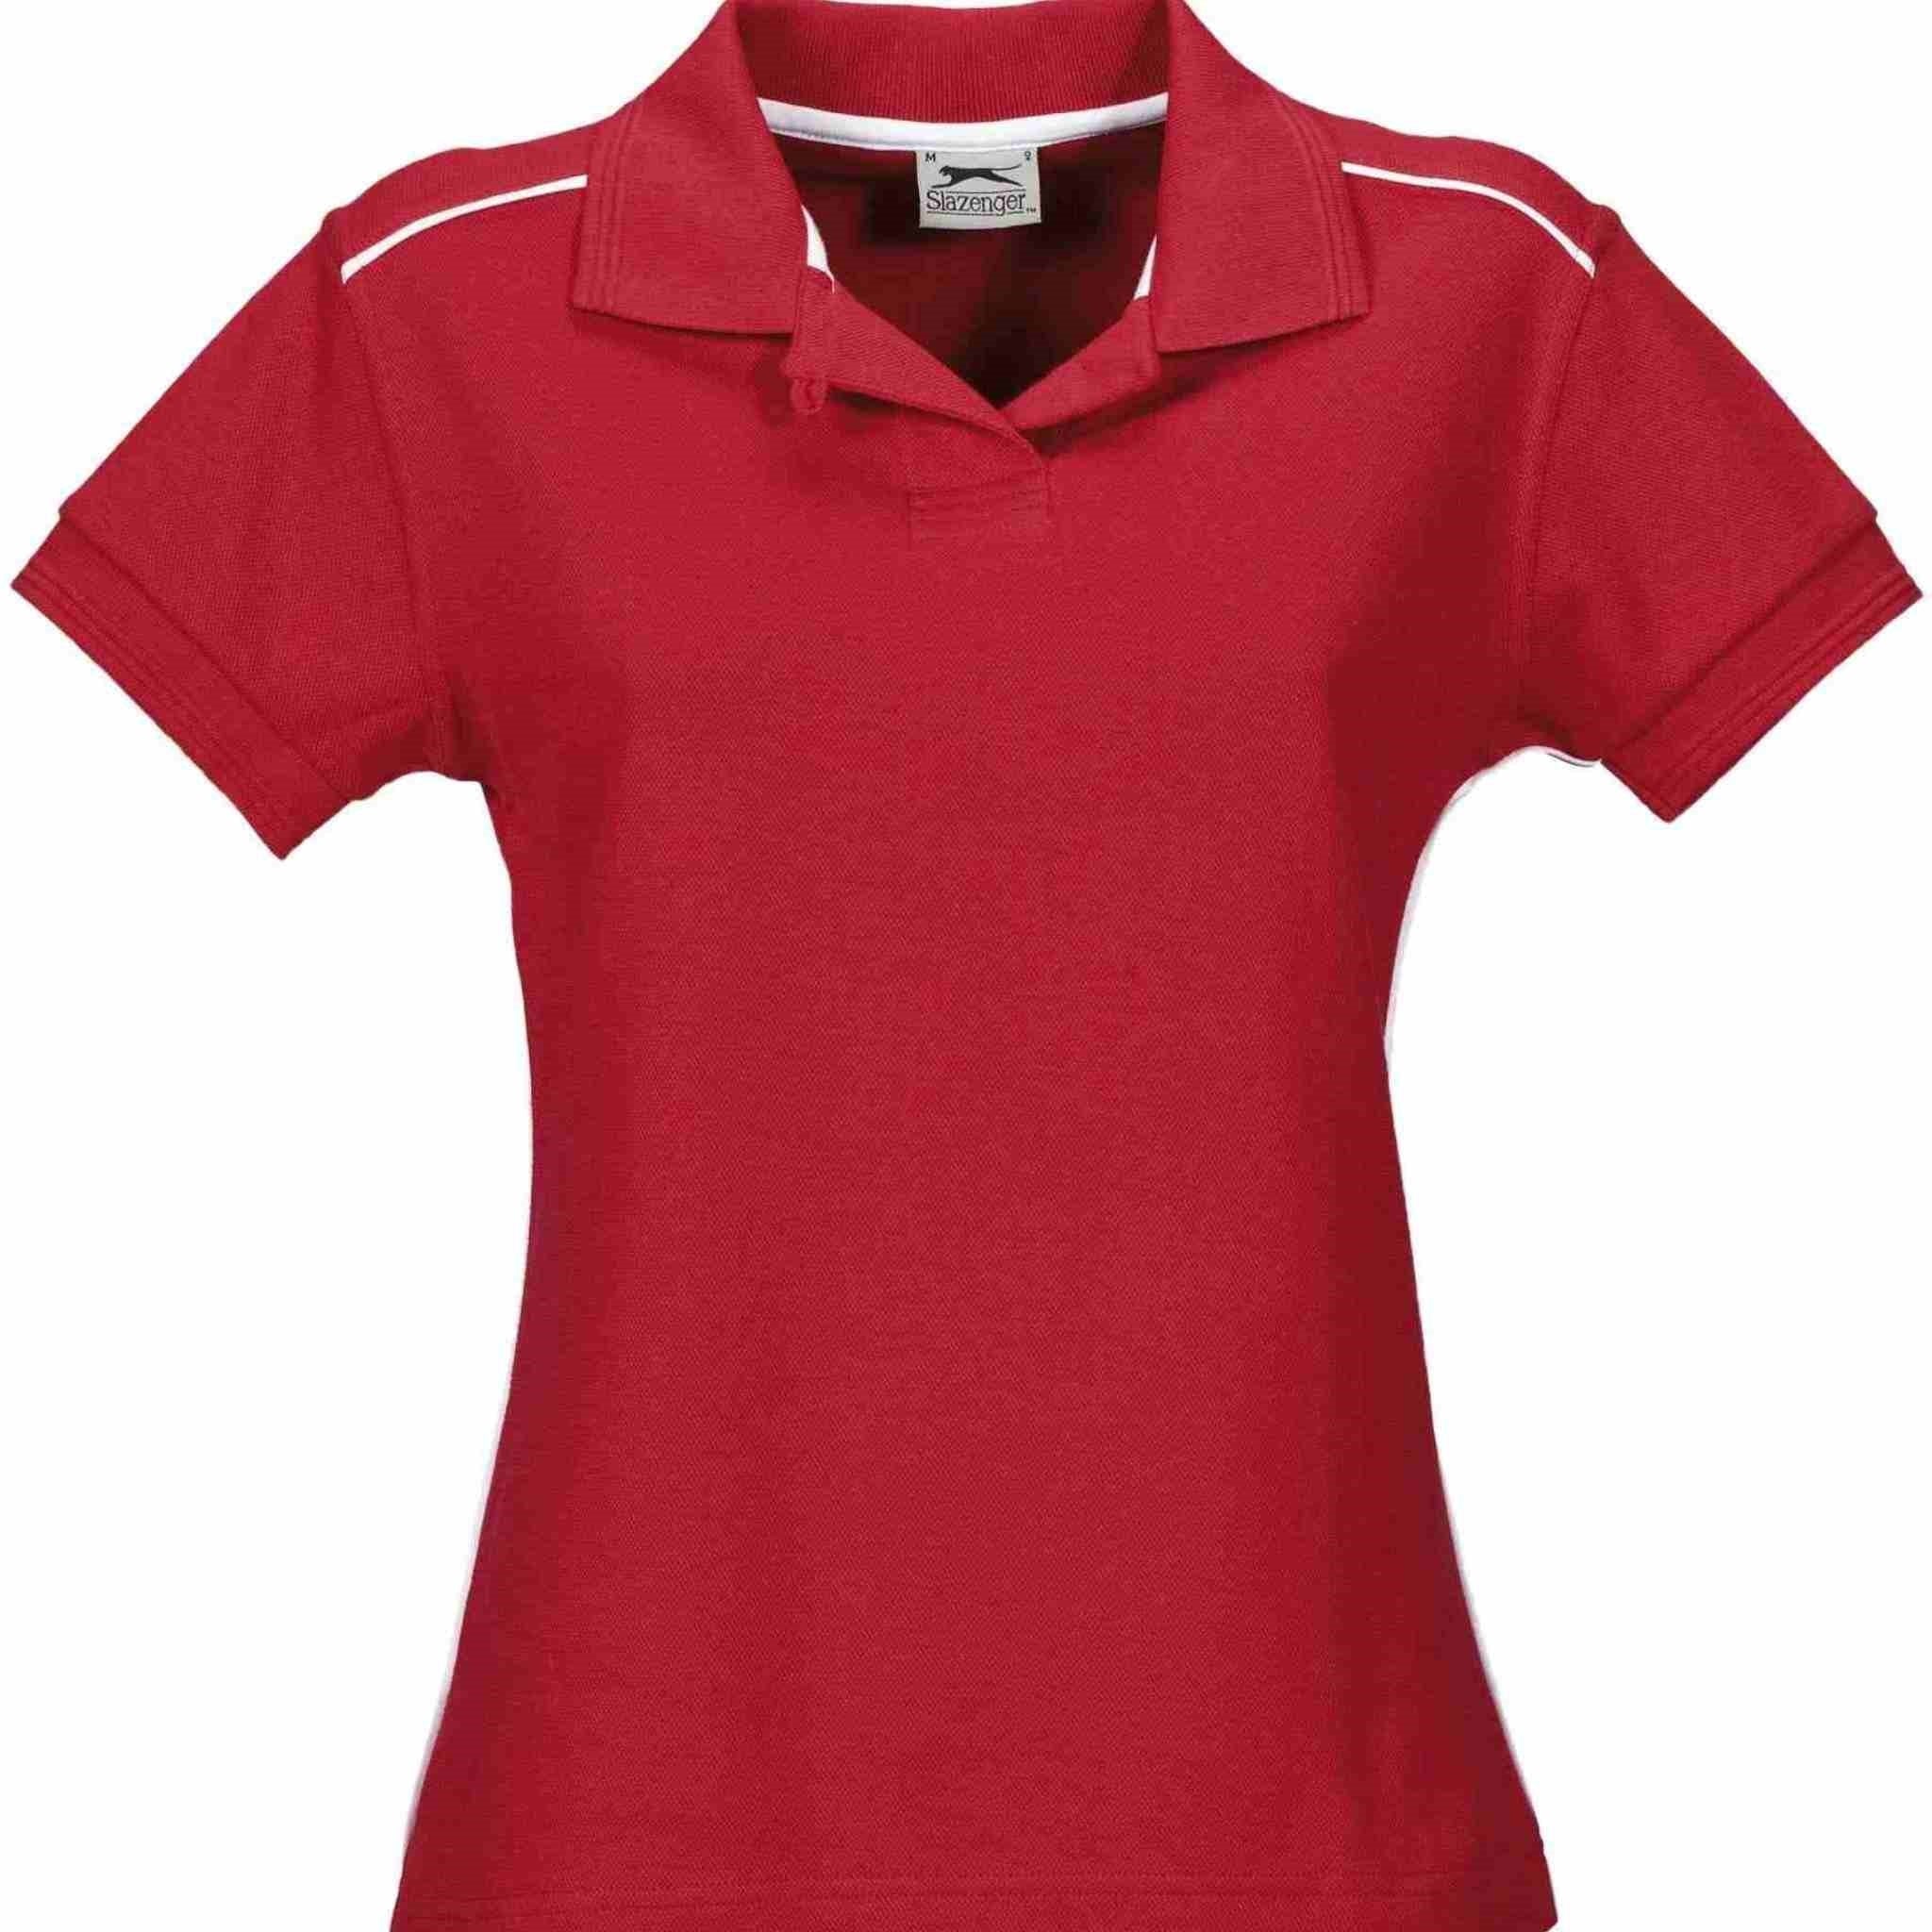 Ladies Backhand Golf Shirt - Red-Shirts & Tops-L-Red-R